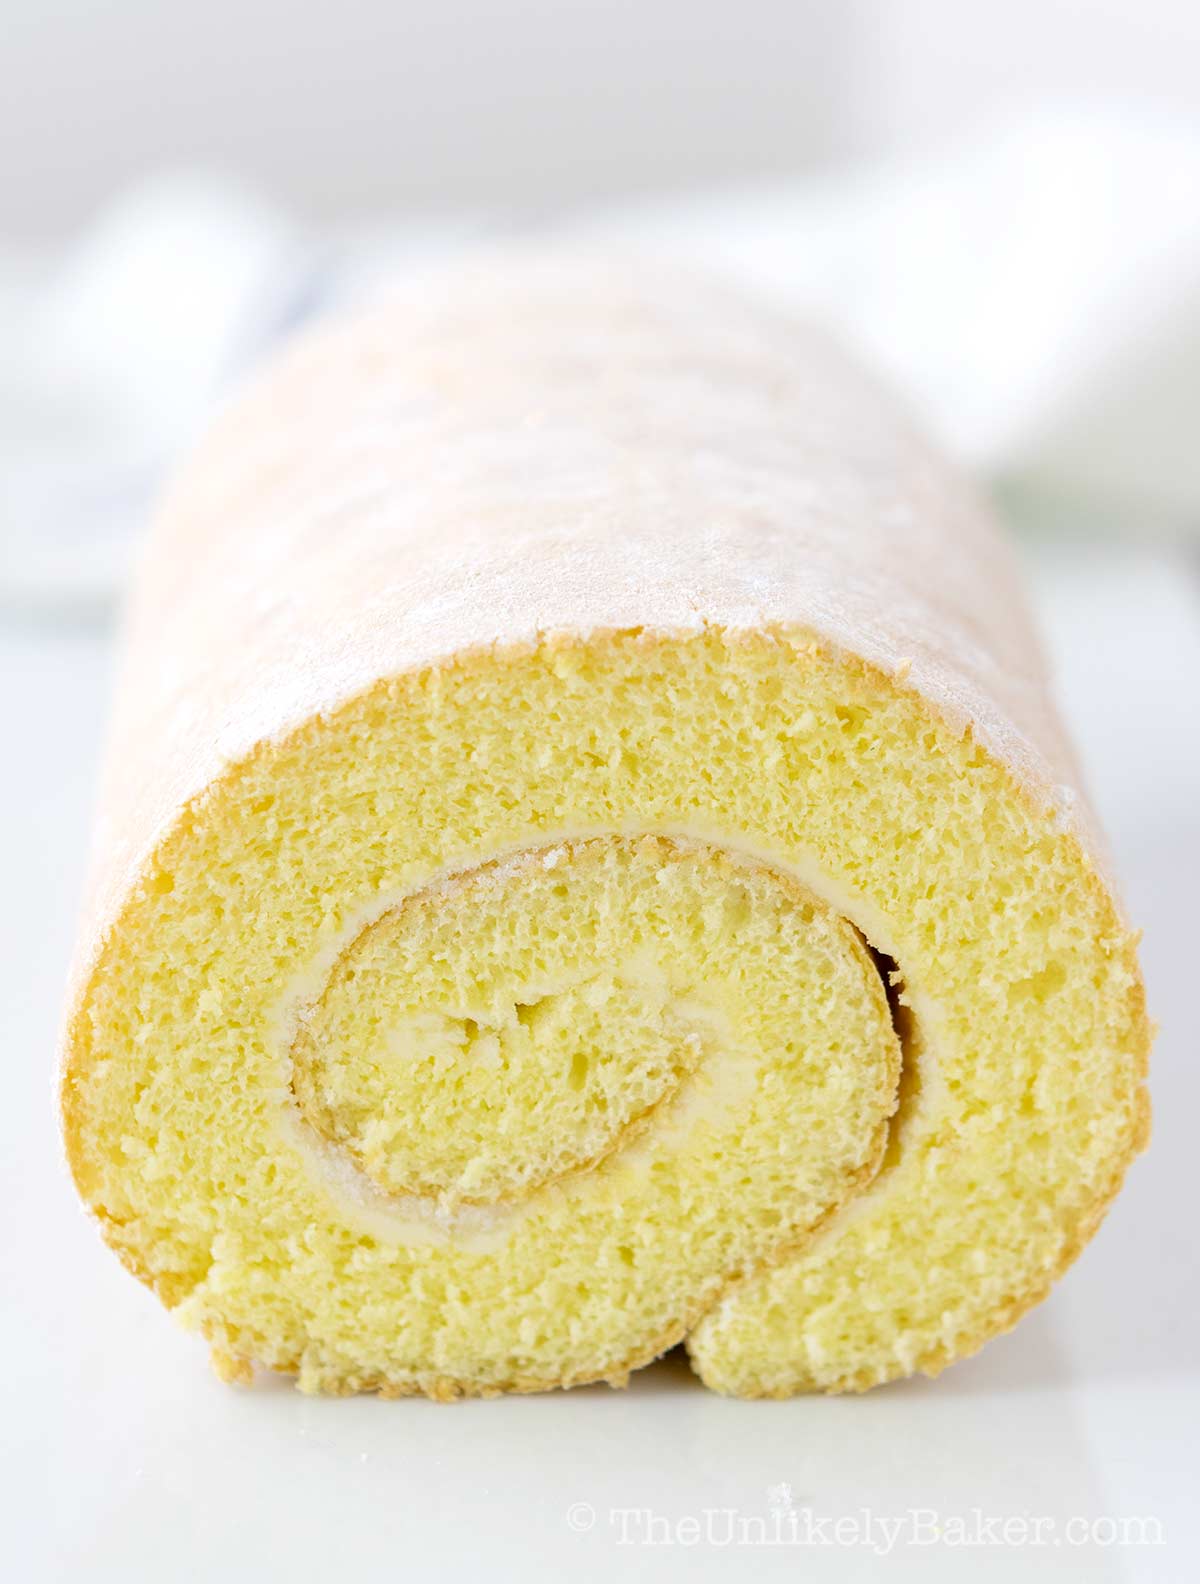 Photo showing butter and sugar pianono filling.